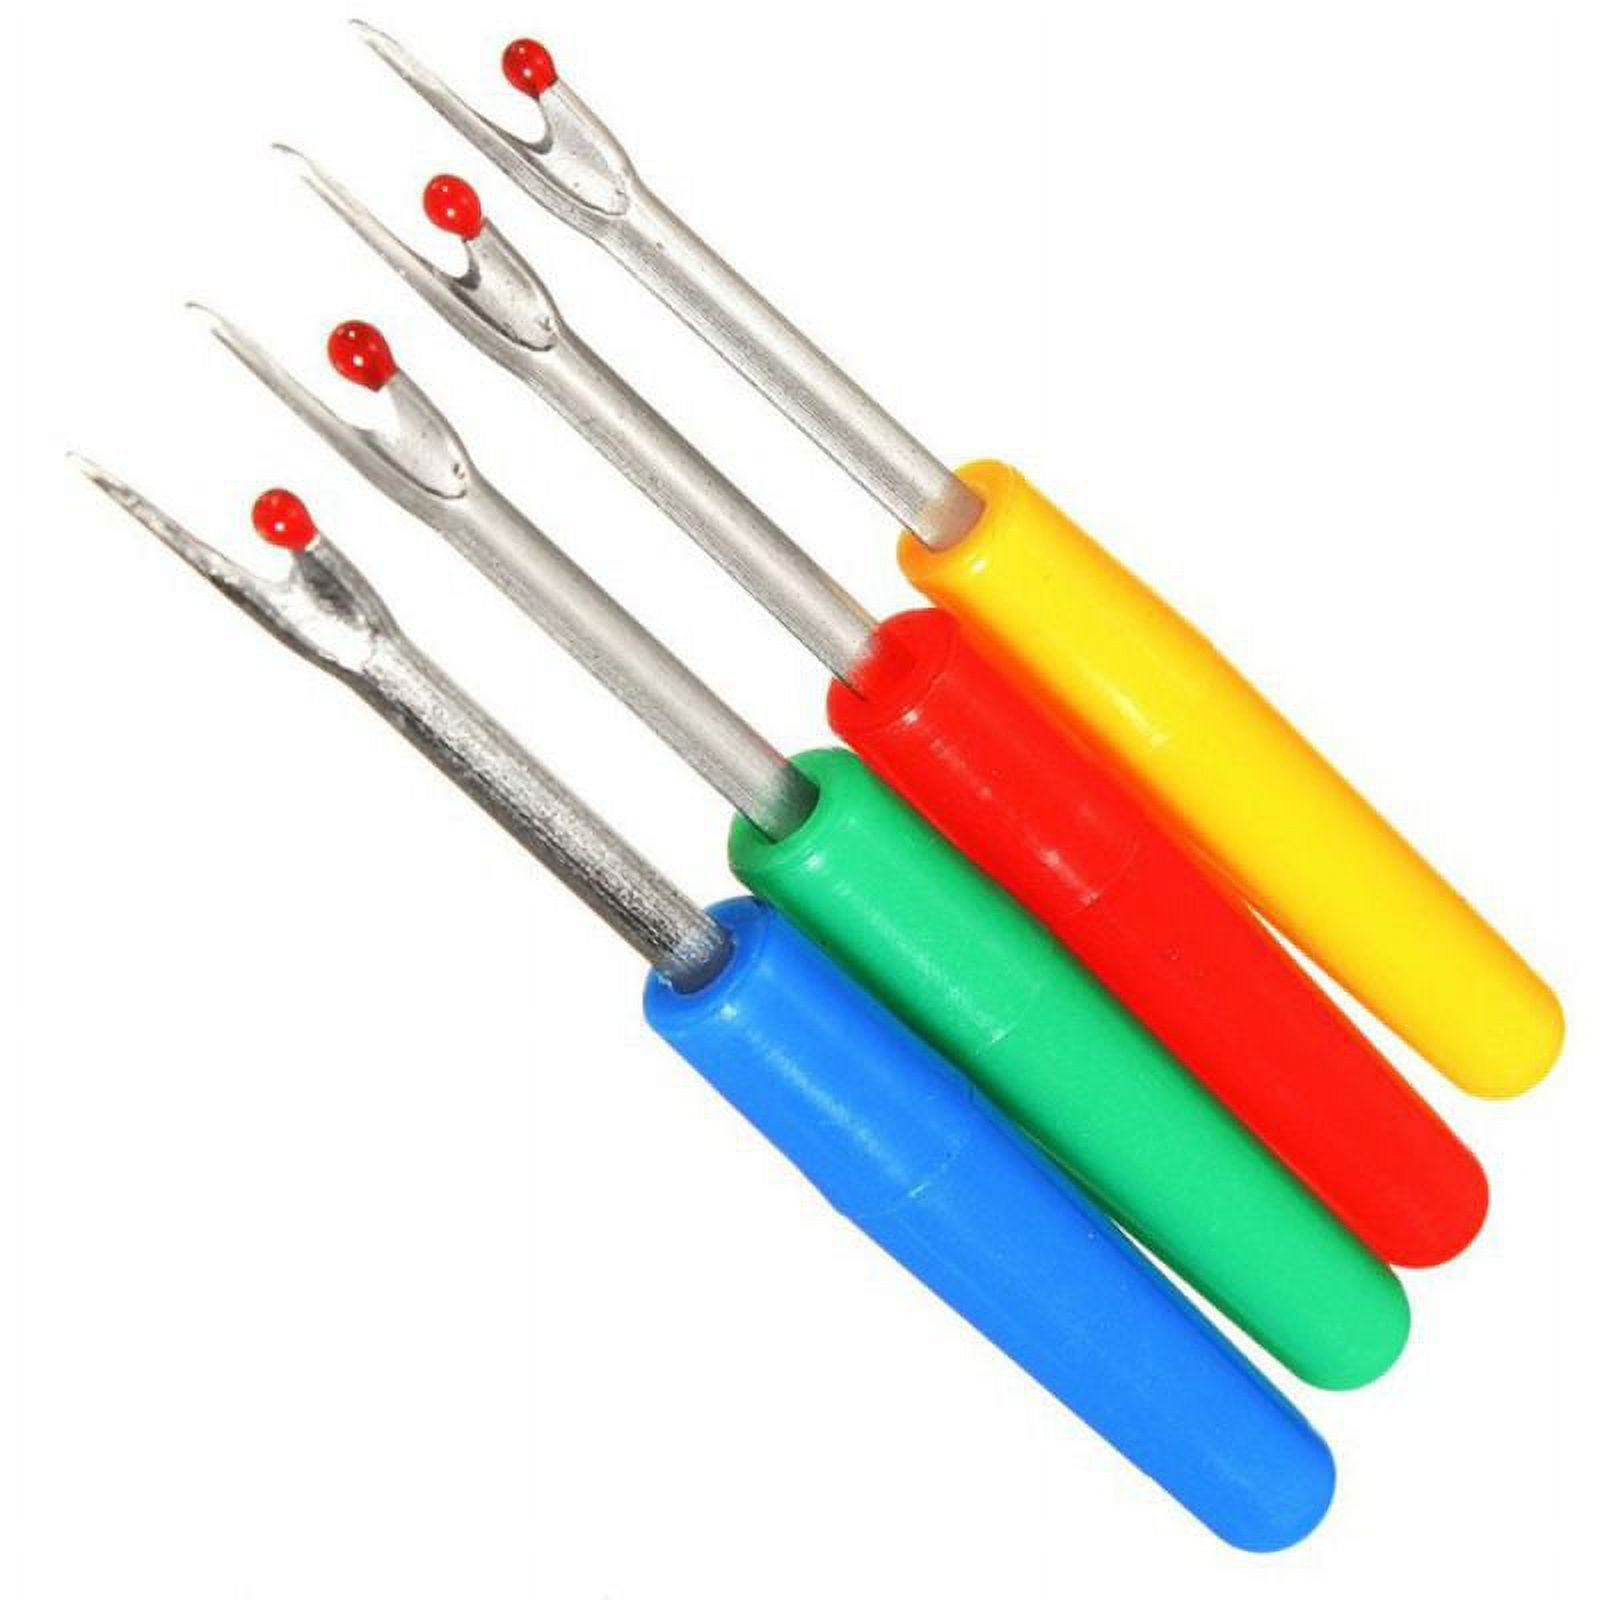 8Pcs Sewing Seam Rippers, Handy Stitch Rippers for Sewing/Crafting Removing  Threads Tools (4 Large & 4 Small)